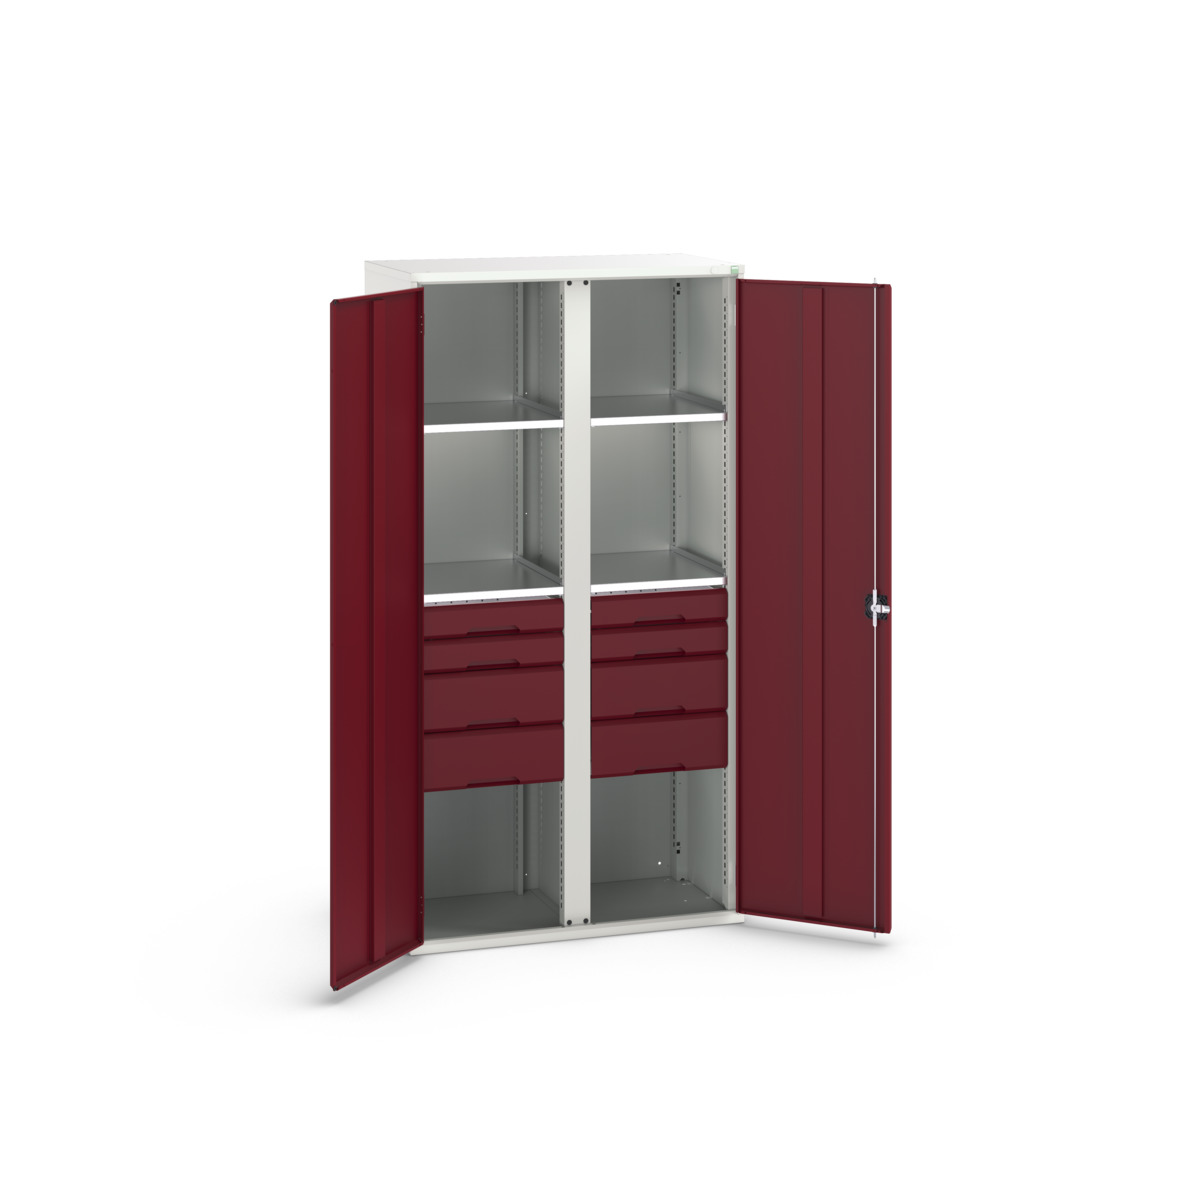 16926583.24 - verso kitted cupboard